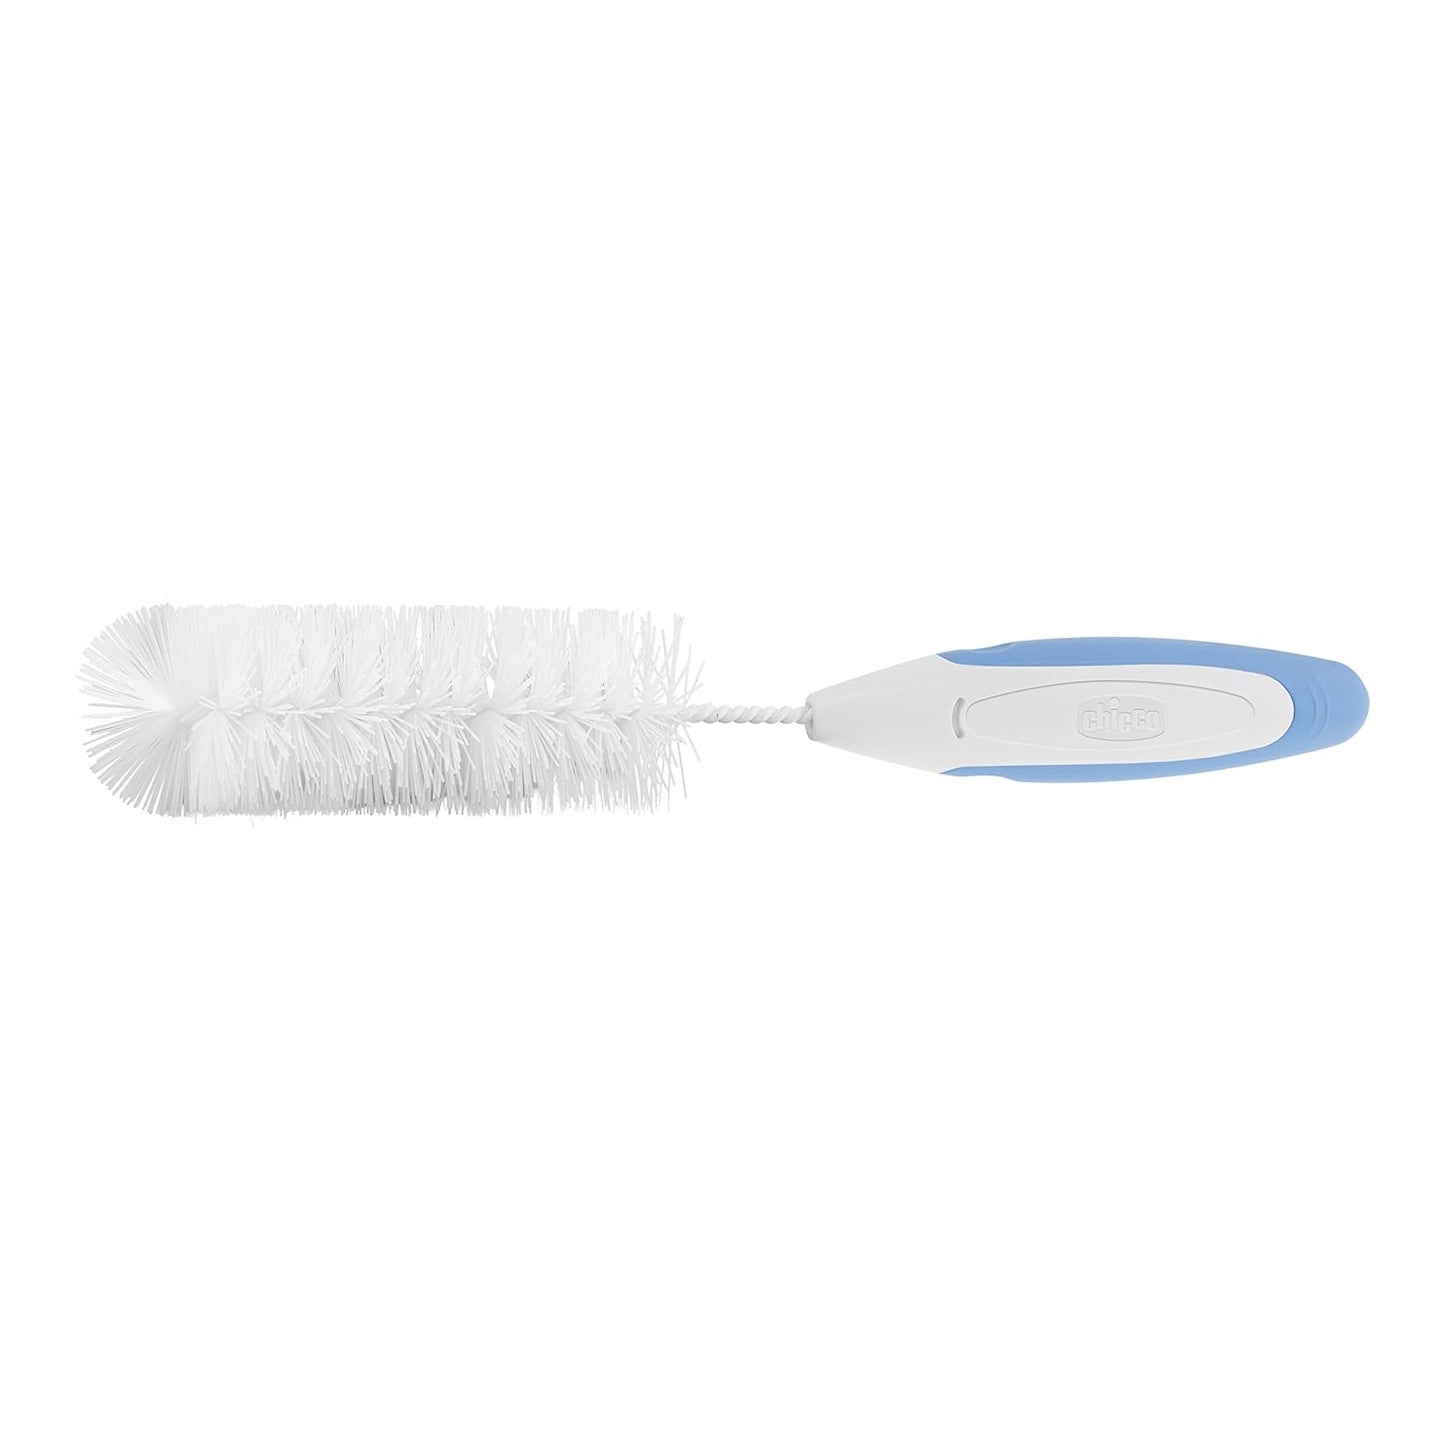 Chicco 3-In-1 Bottle Cleaning Brush